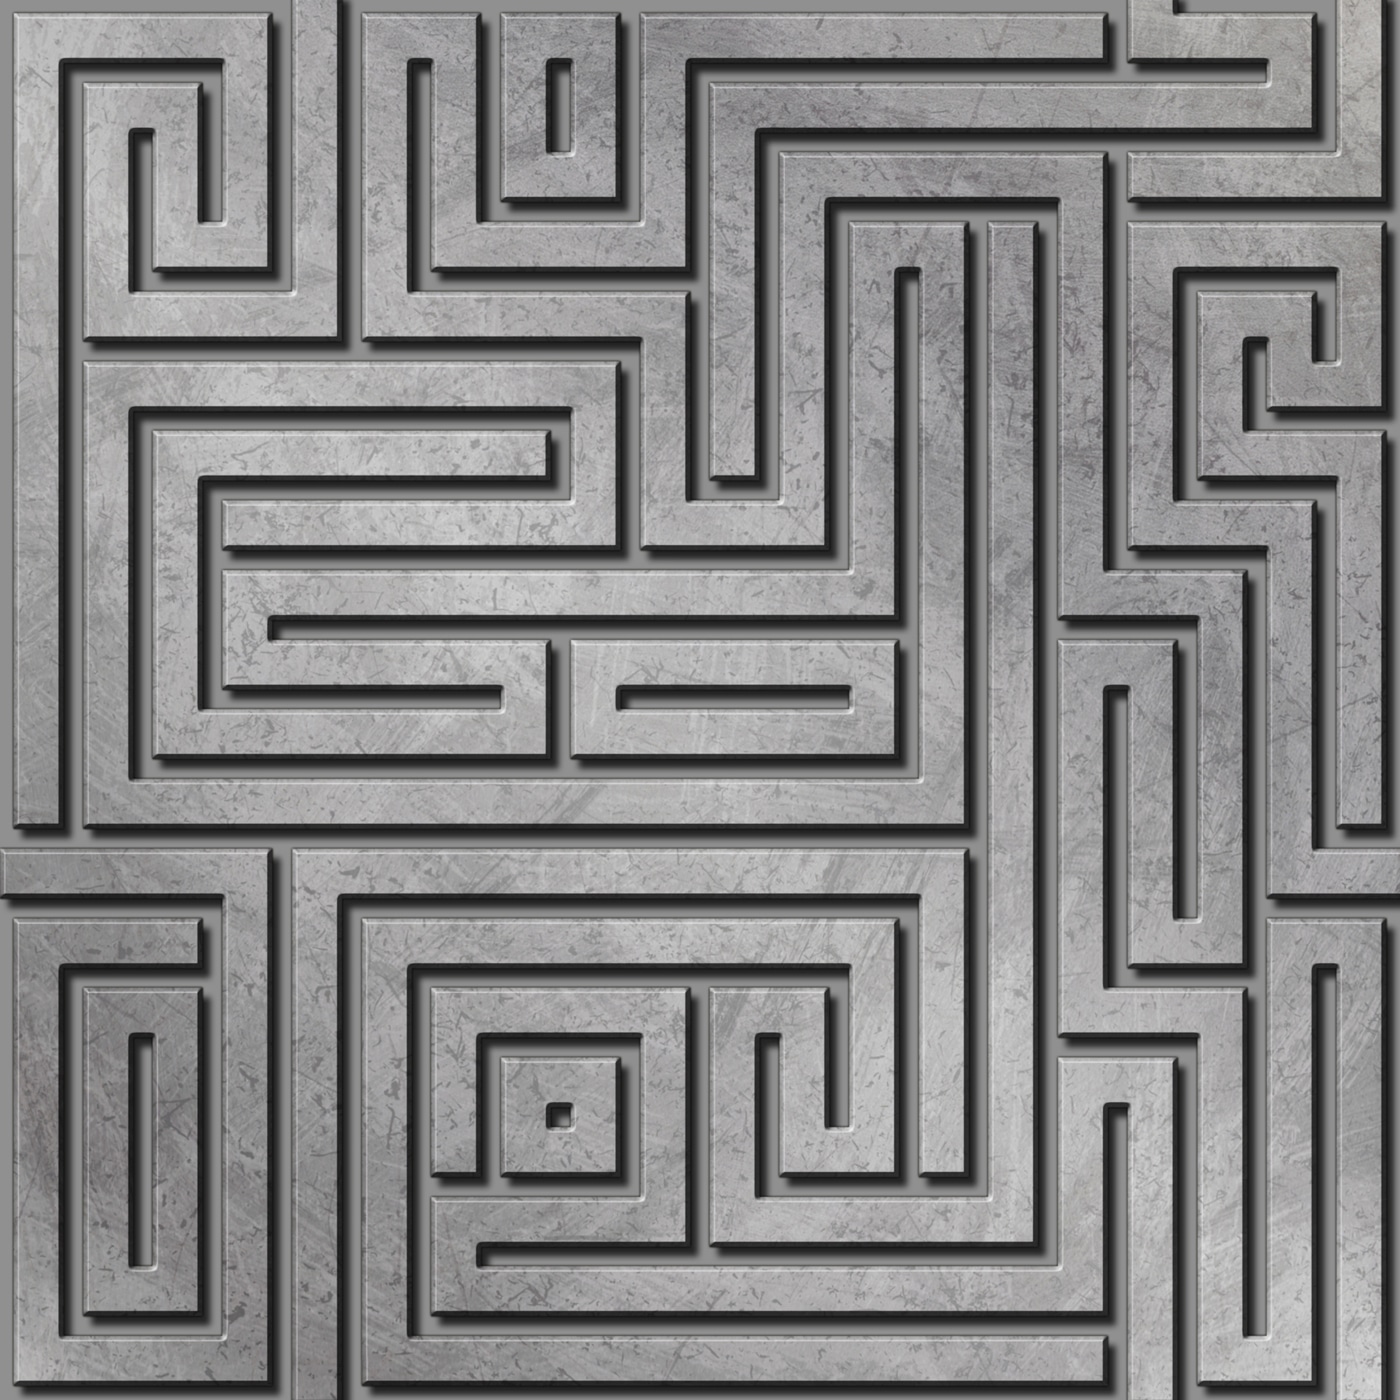 Virtual Reality System Takes Users Through An Endless Maze In One Room